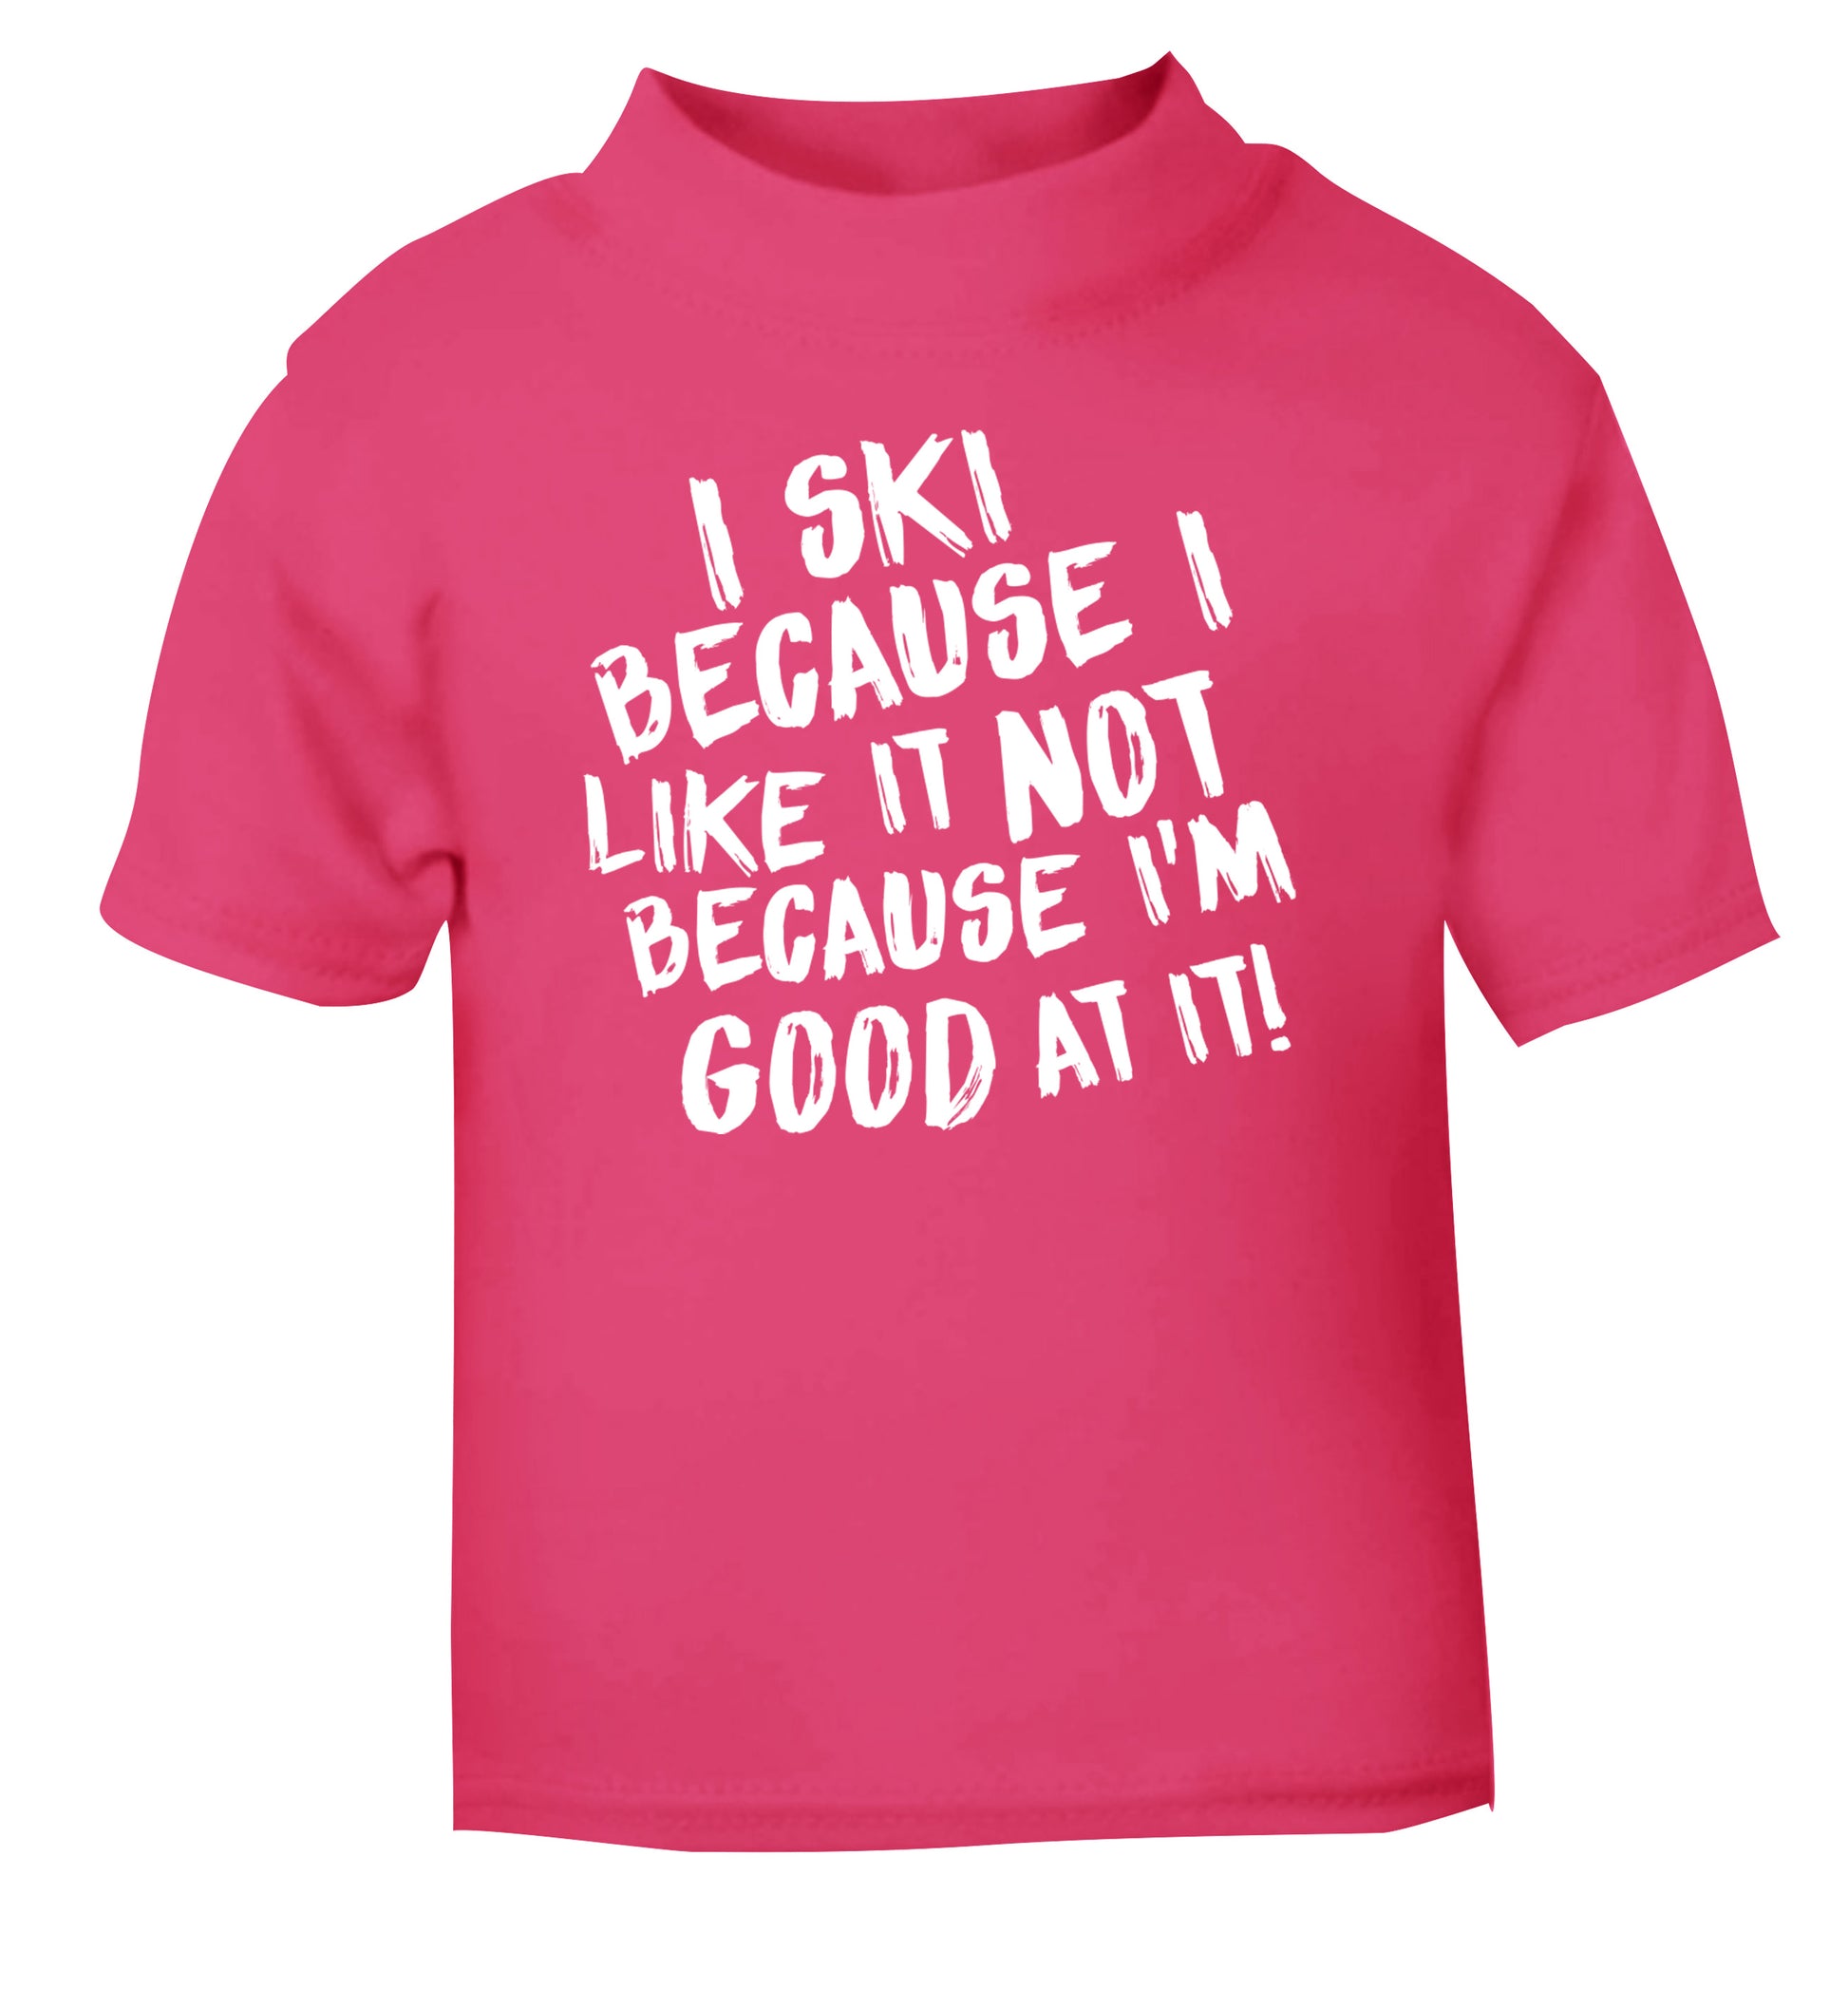 I ski because I like it not because I'm good at it pink Baby Toddler Tshirt 2 Years